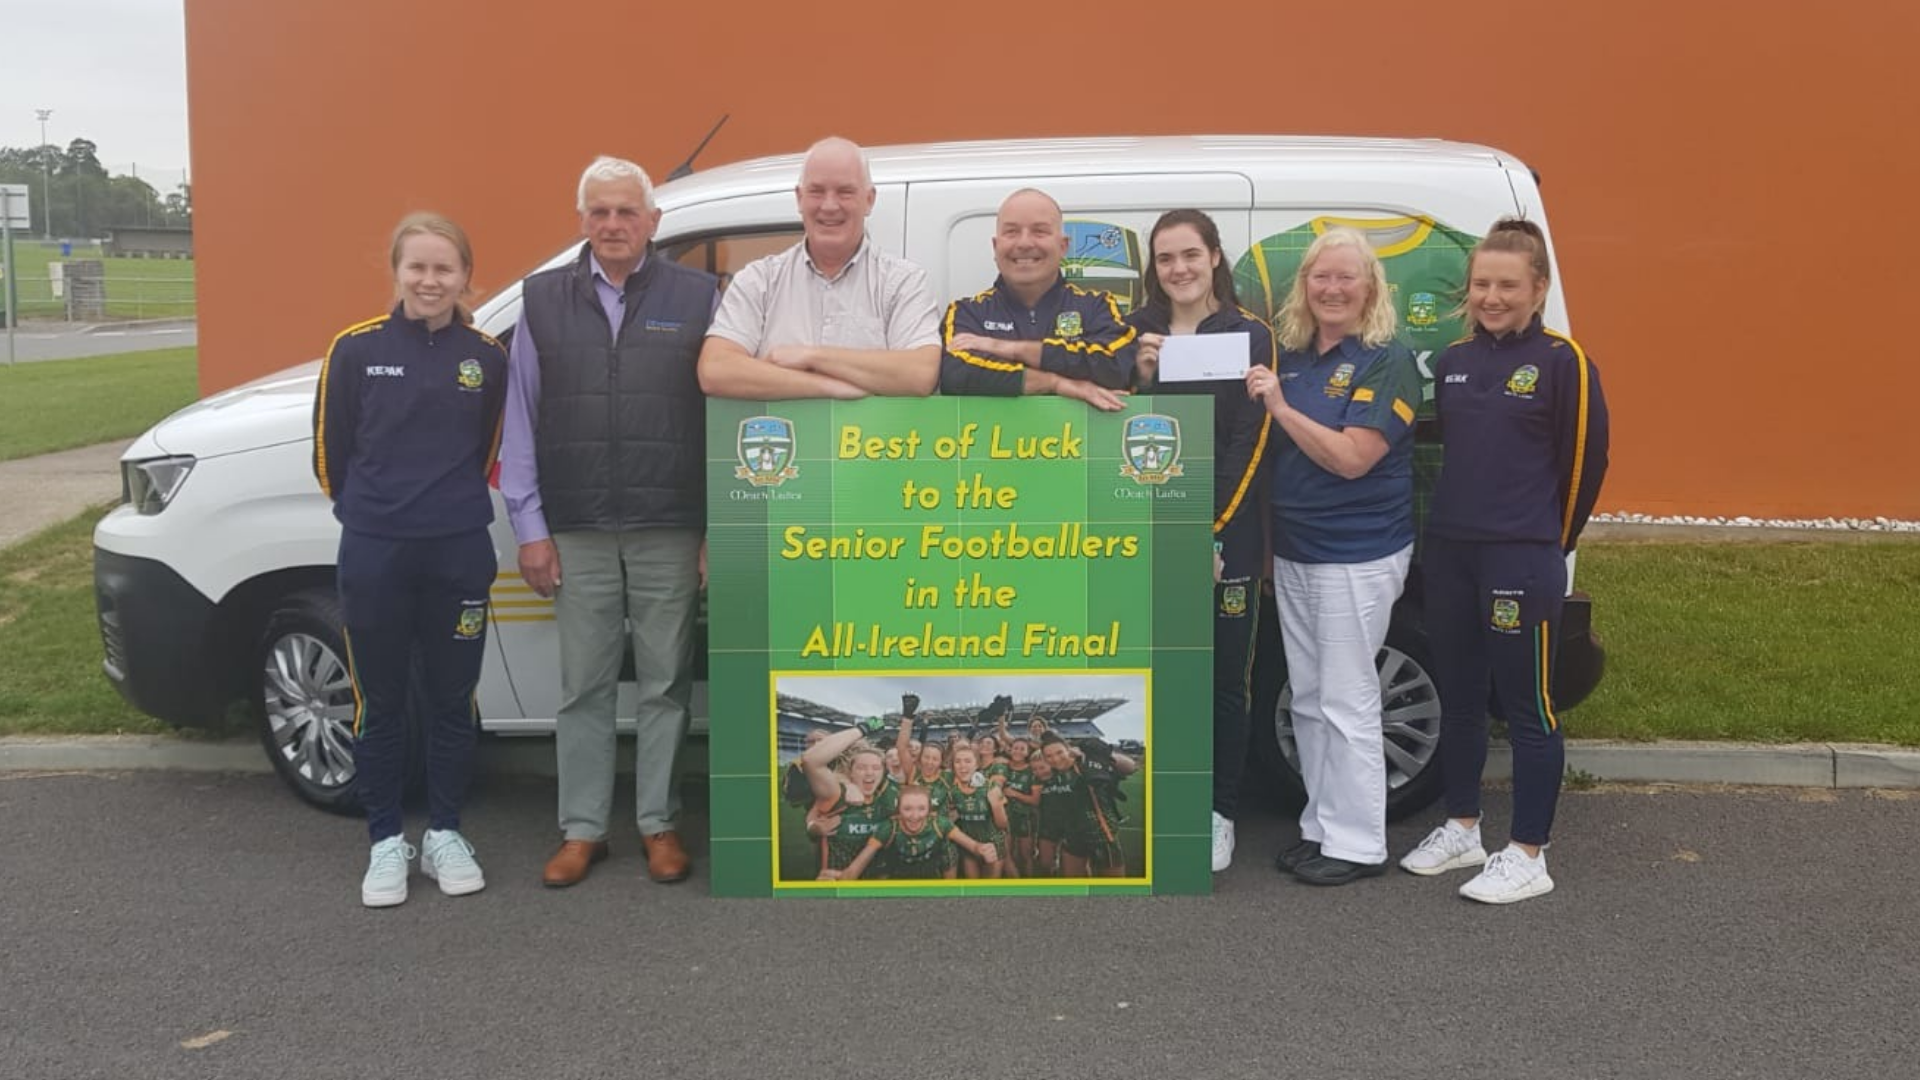 Meath G.A.A. happy to support the All-Ireland winning Meath Ladies Football Team